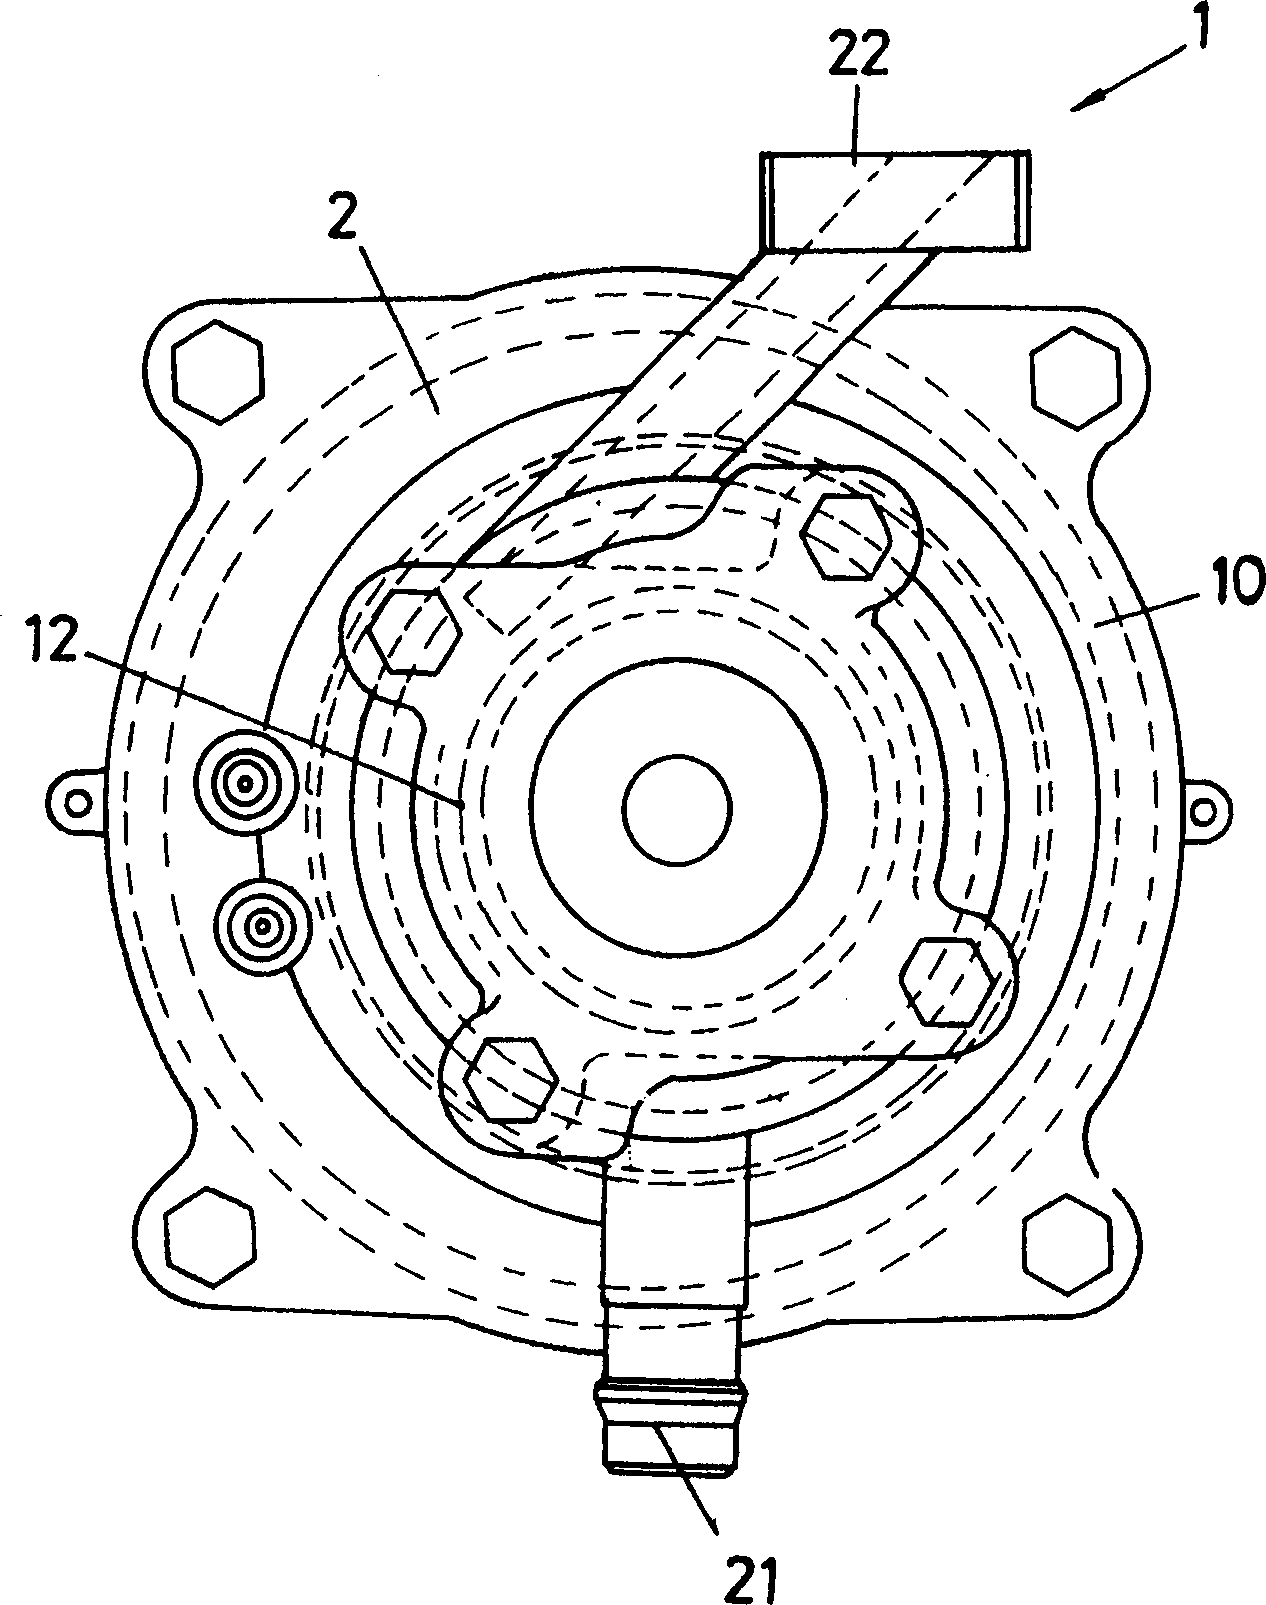 Manifold incorporating thermoelectric module and cooling device using thermoelectric module